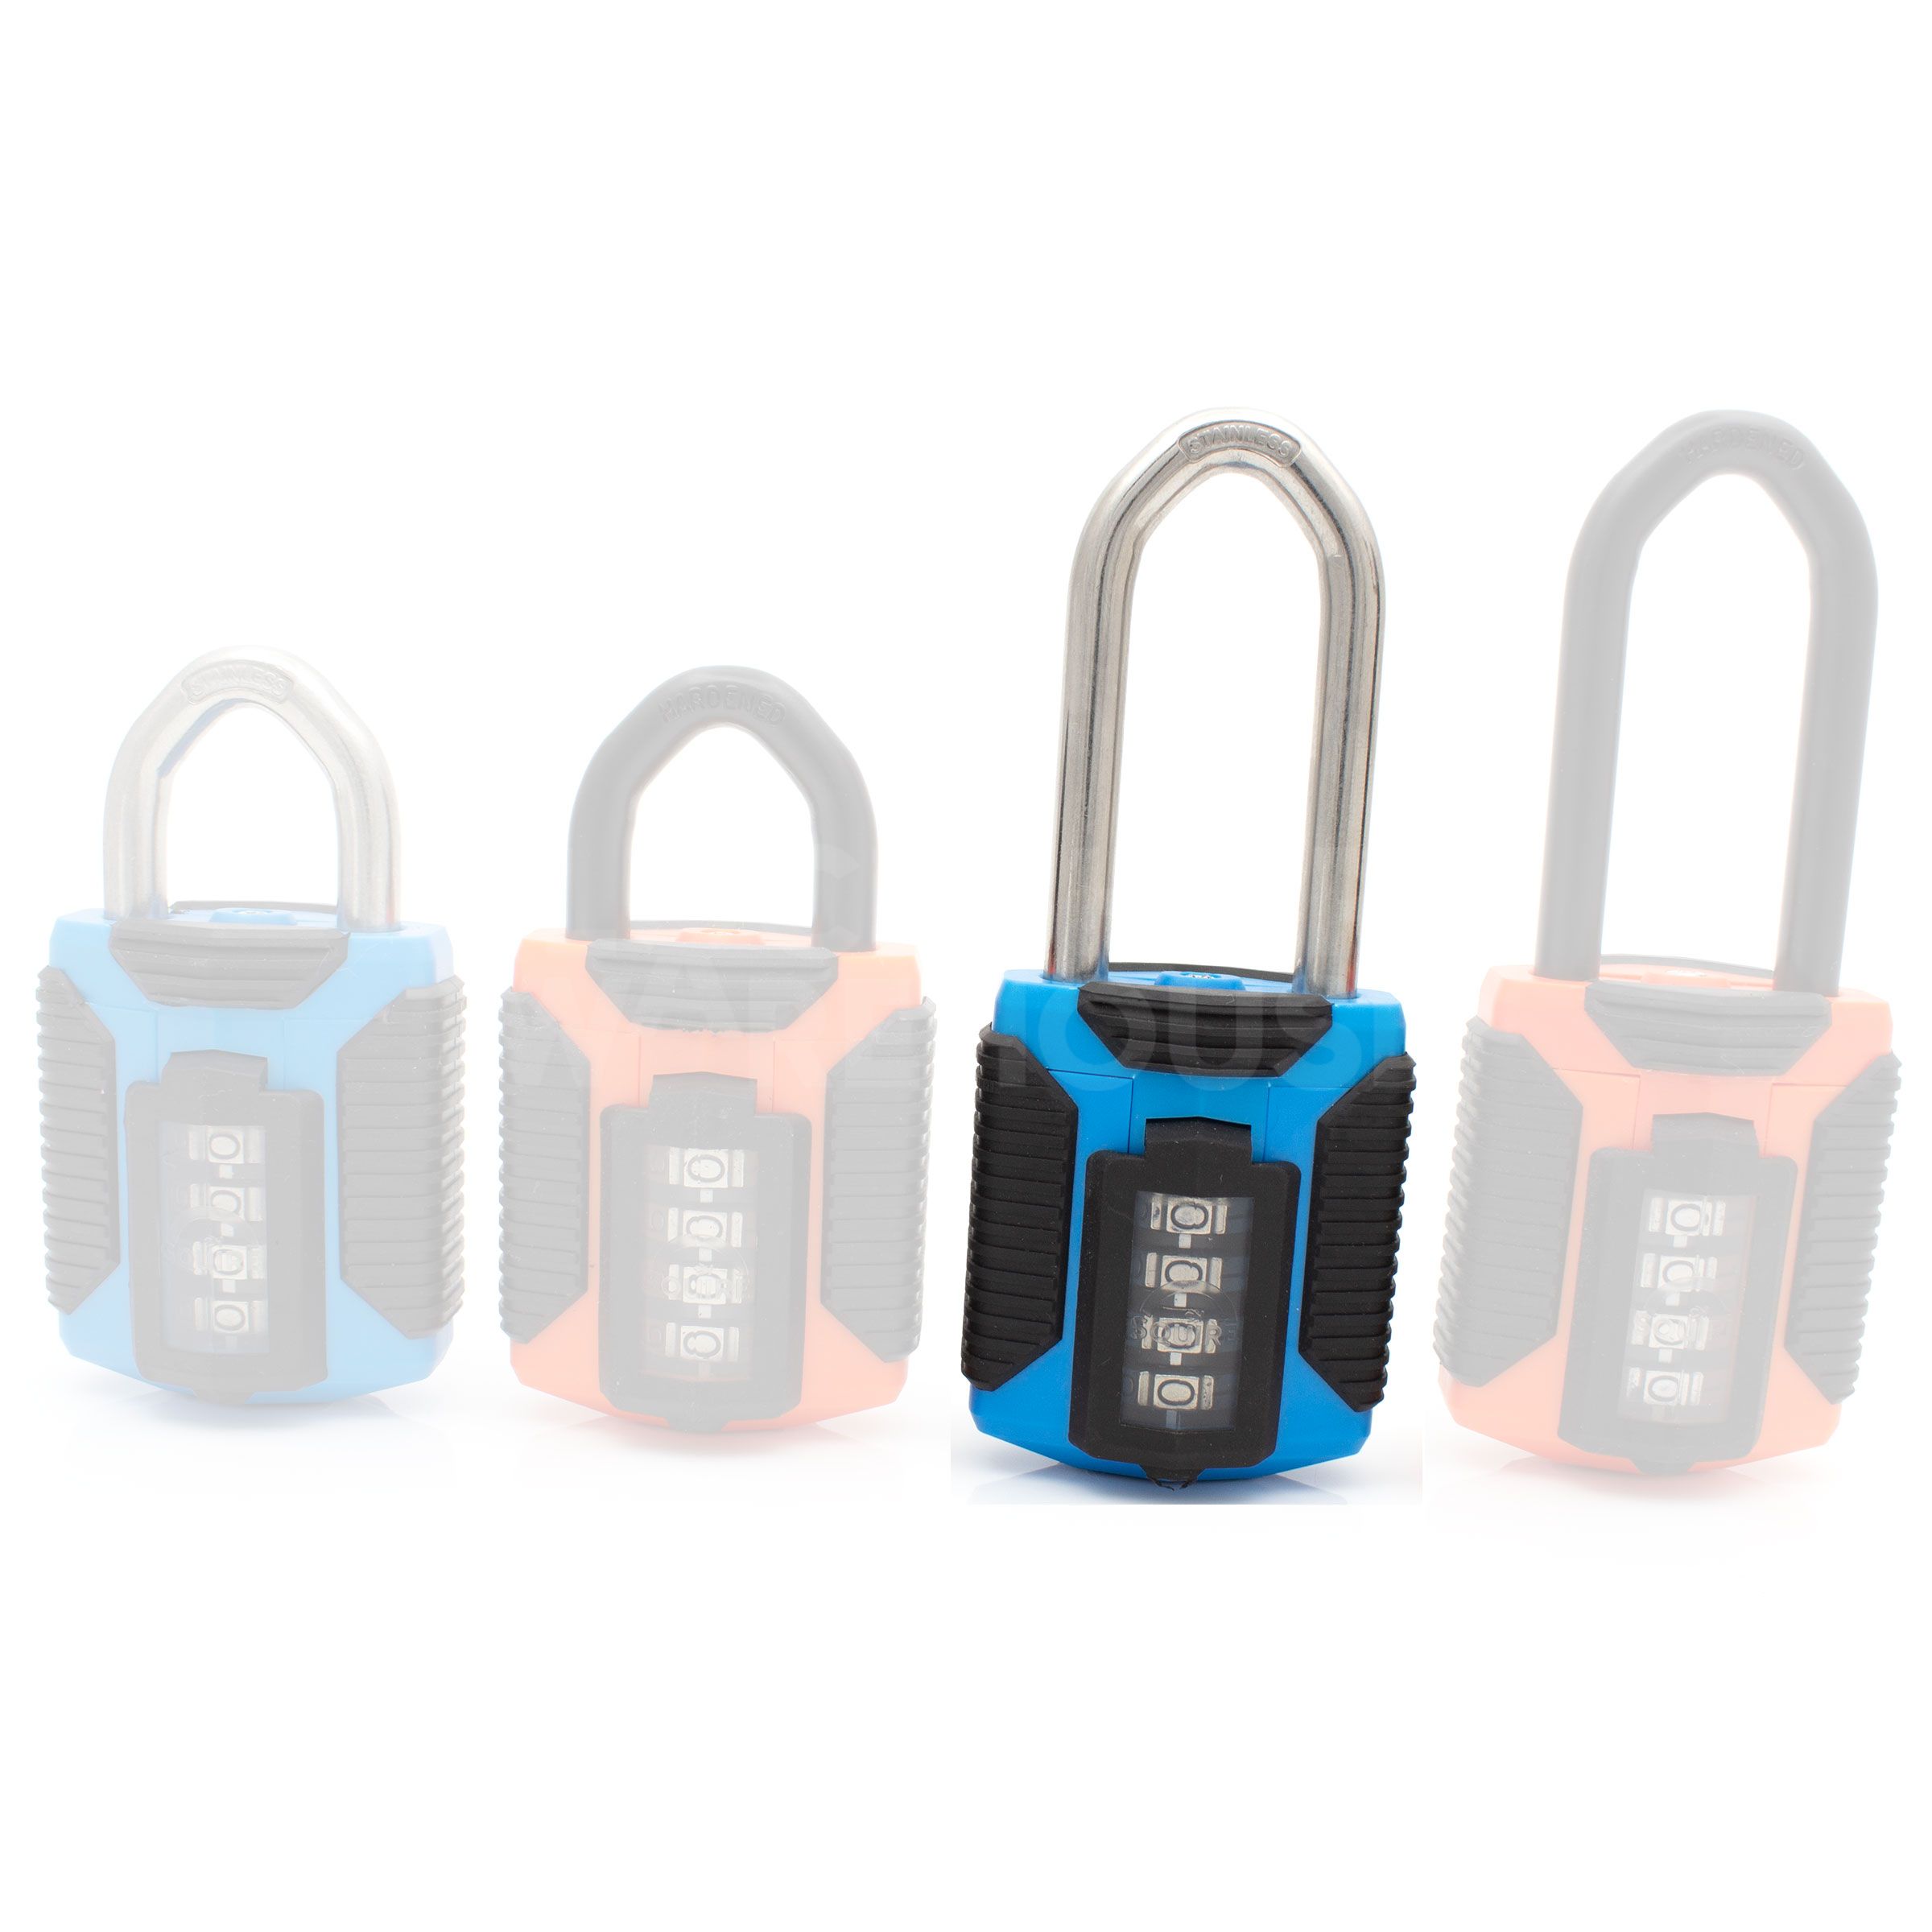 Dimensions Image: Squire CP50 - ATLS - All Terrain Padlock - Stainless Steel Shackle- 63mm Long Shackle